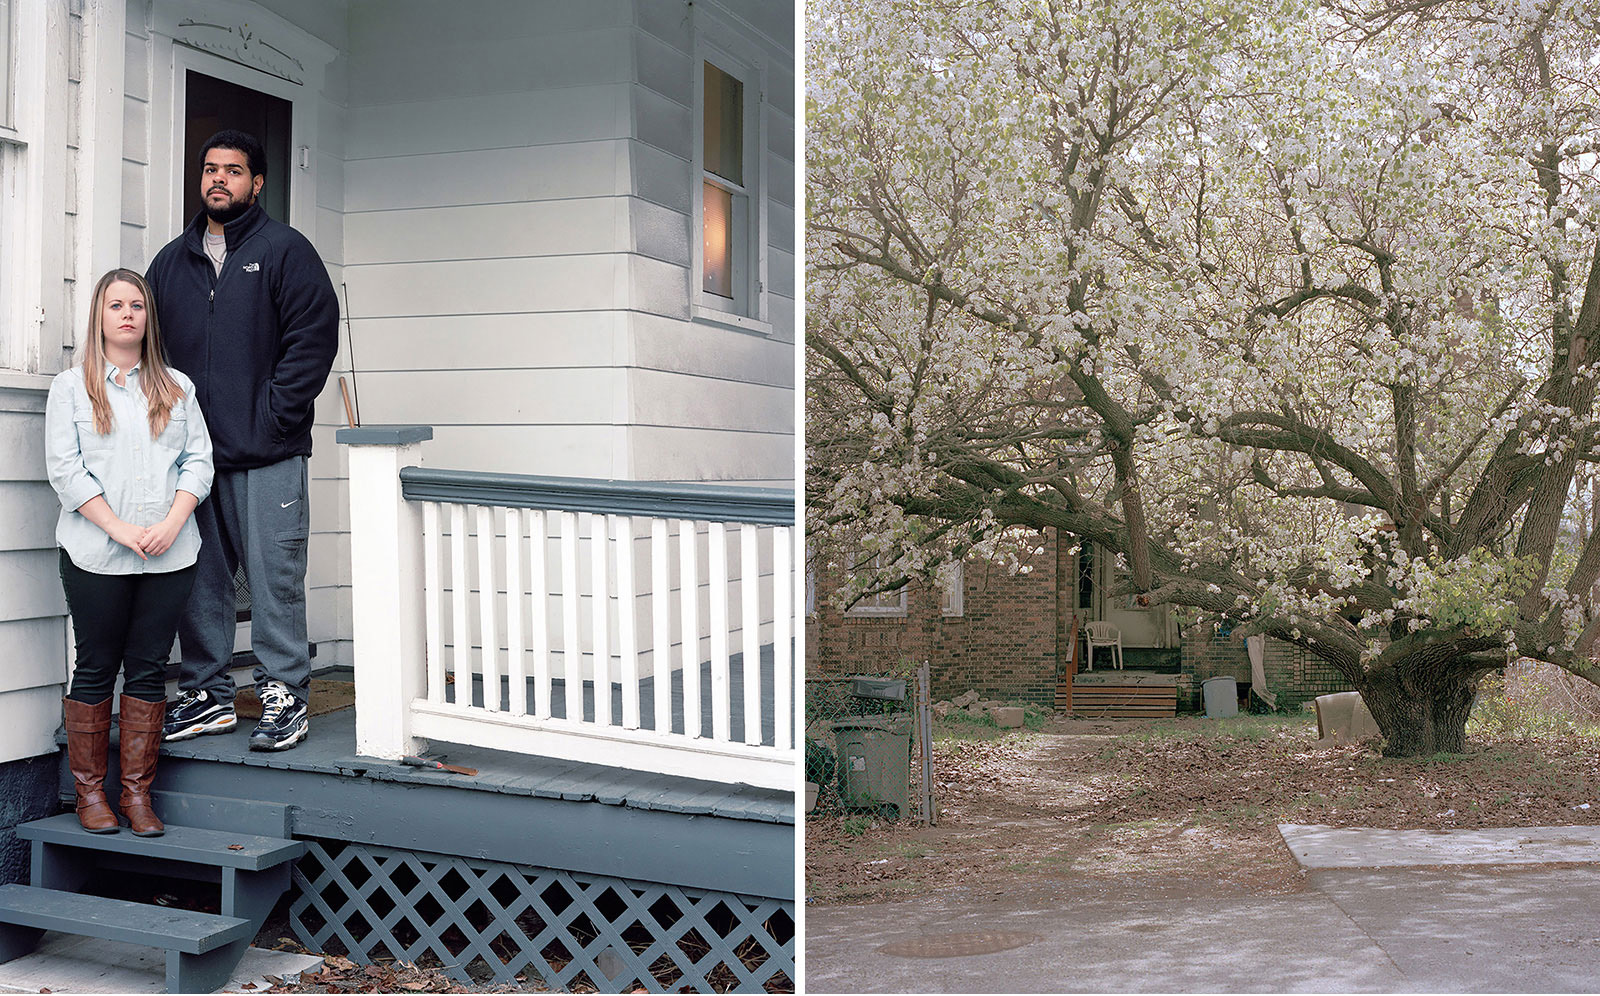 Left, a couple outside on their porch, right, a photo of a porch on a house